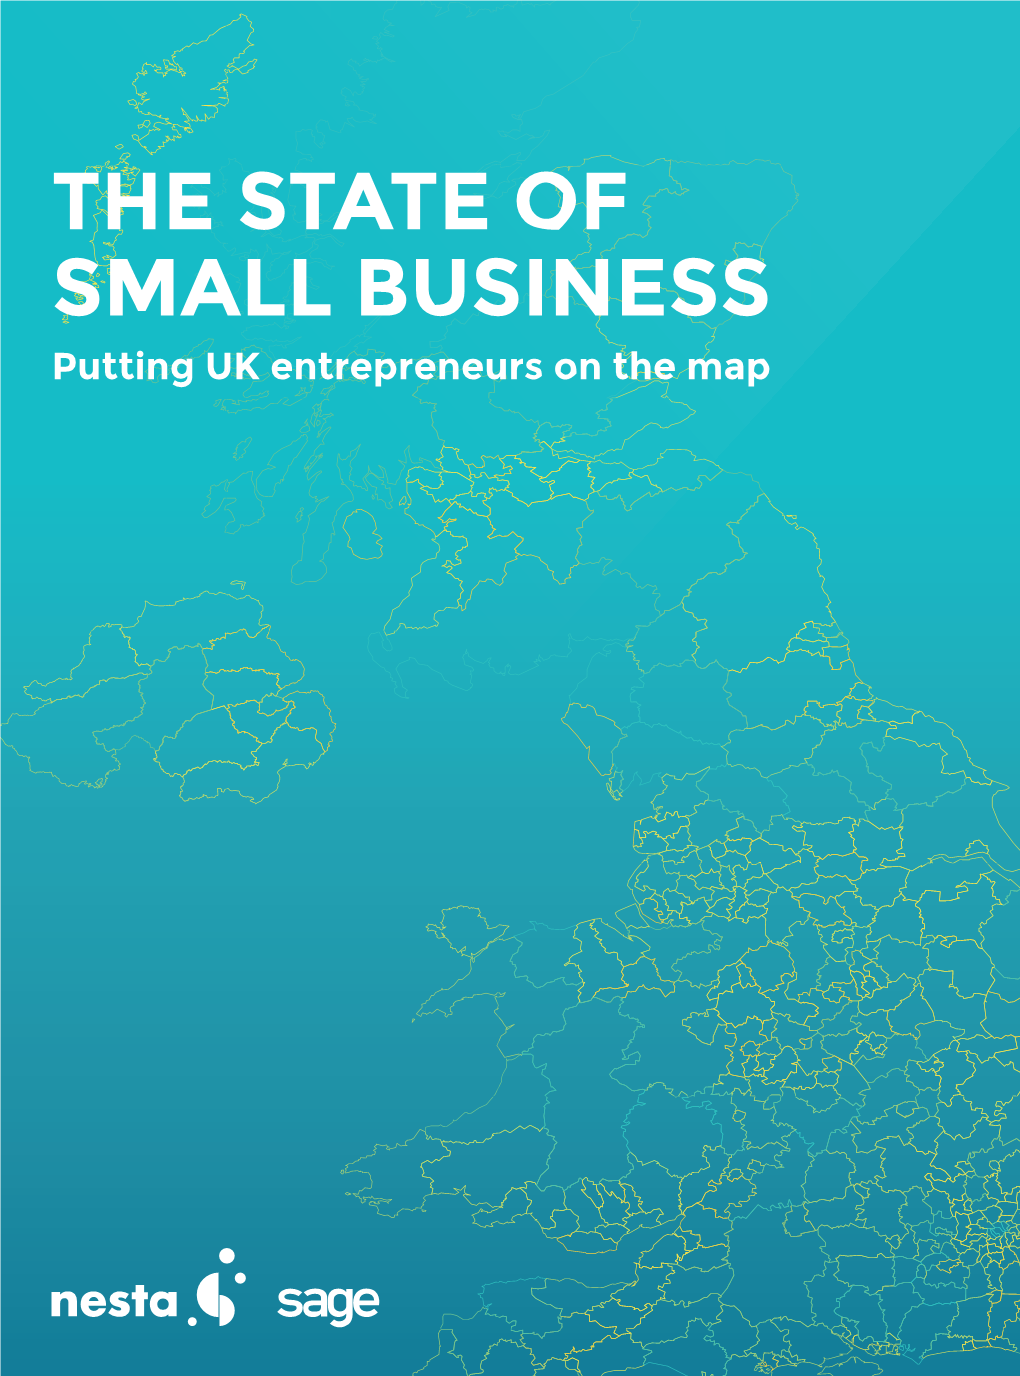 THE STATE of SMALL BUSINESS Putting UK Entrepreneurs on the Map the State of Small Business